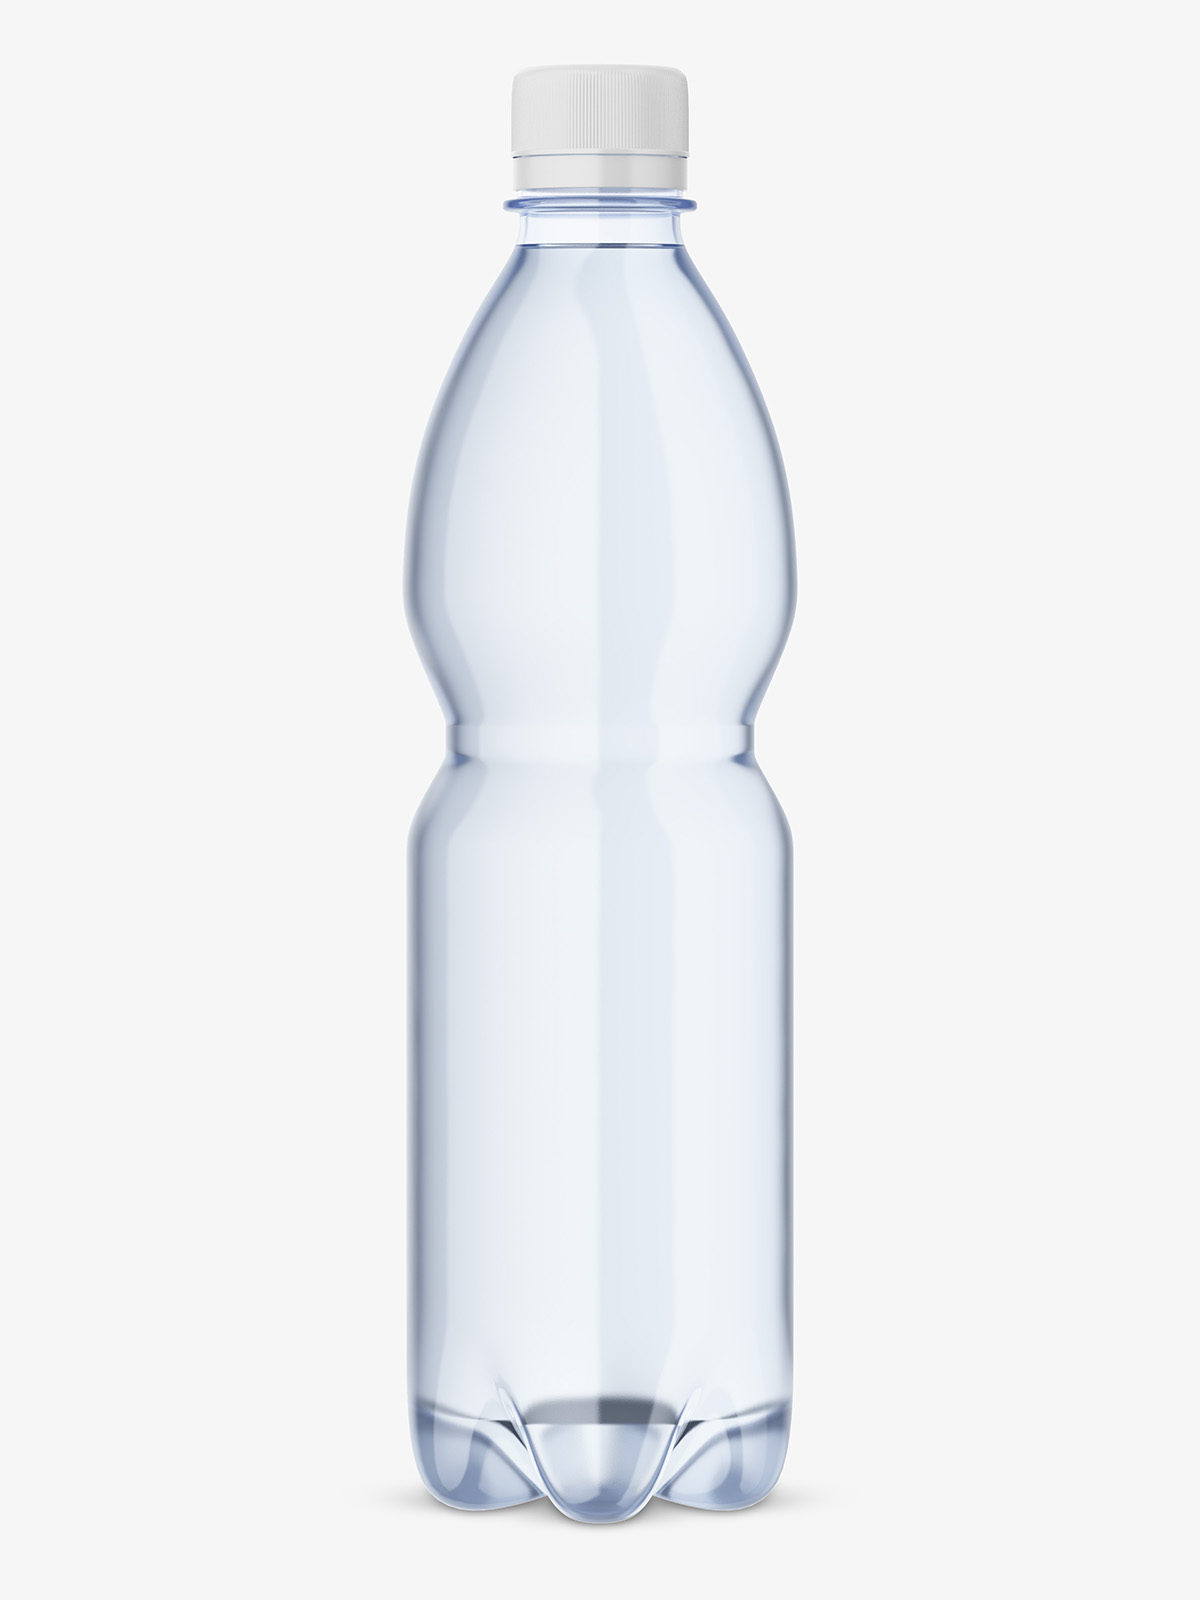 Glass bottle with mineral water mockup